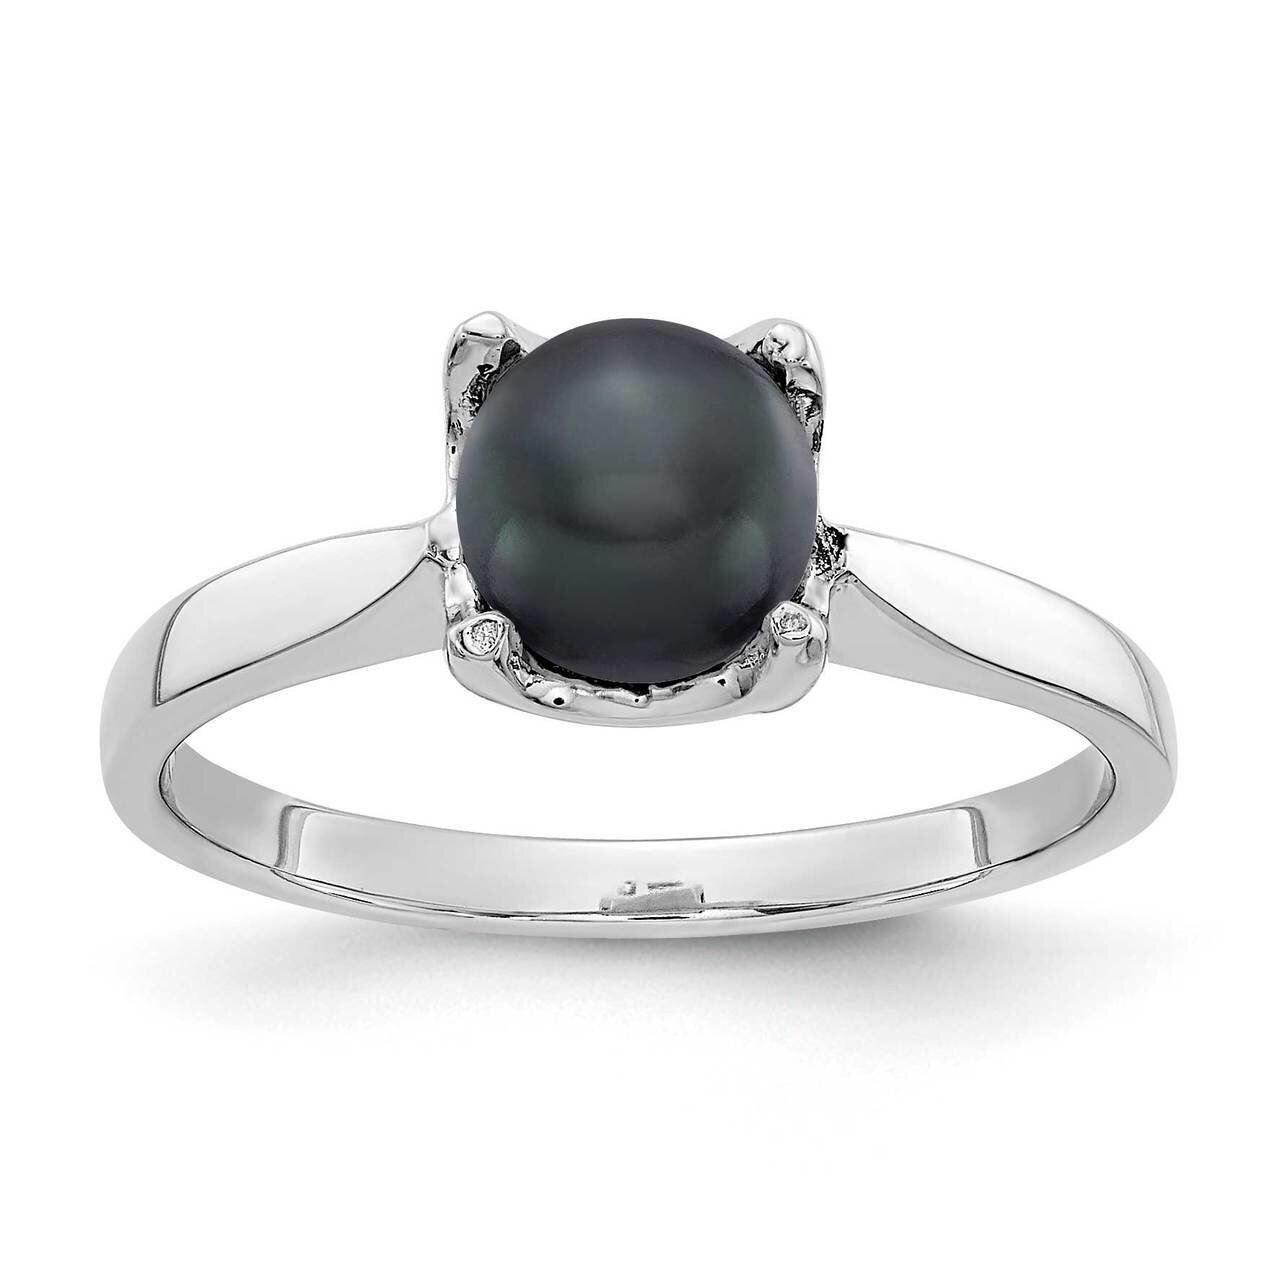 6mm Black Freshwater Cultured Pearl Ring 14k White Gold Y4312BP